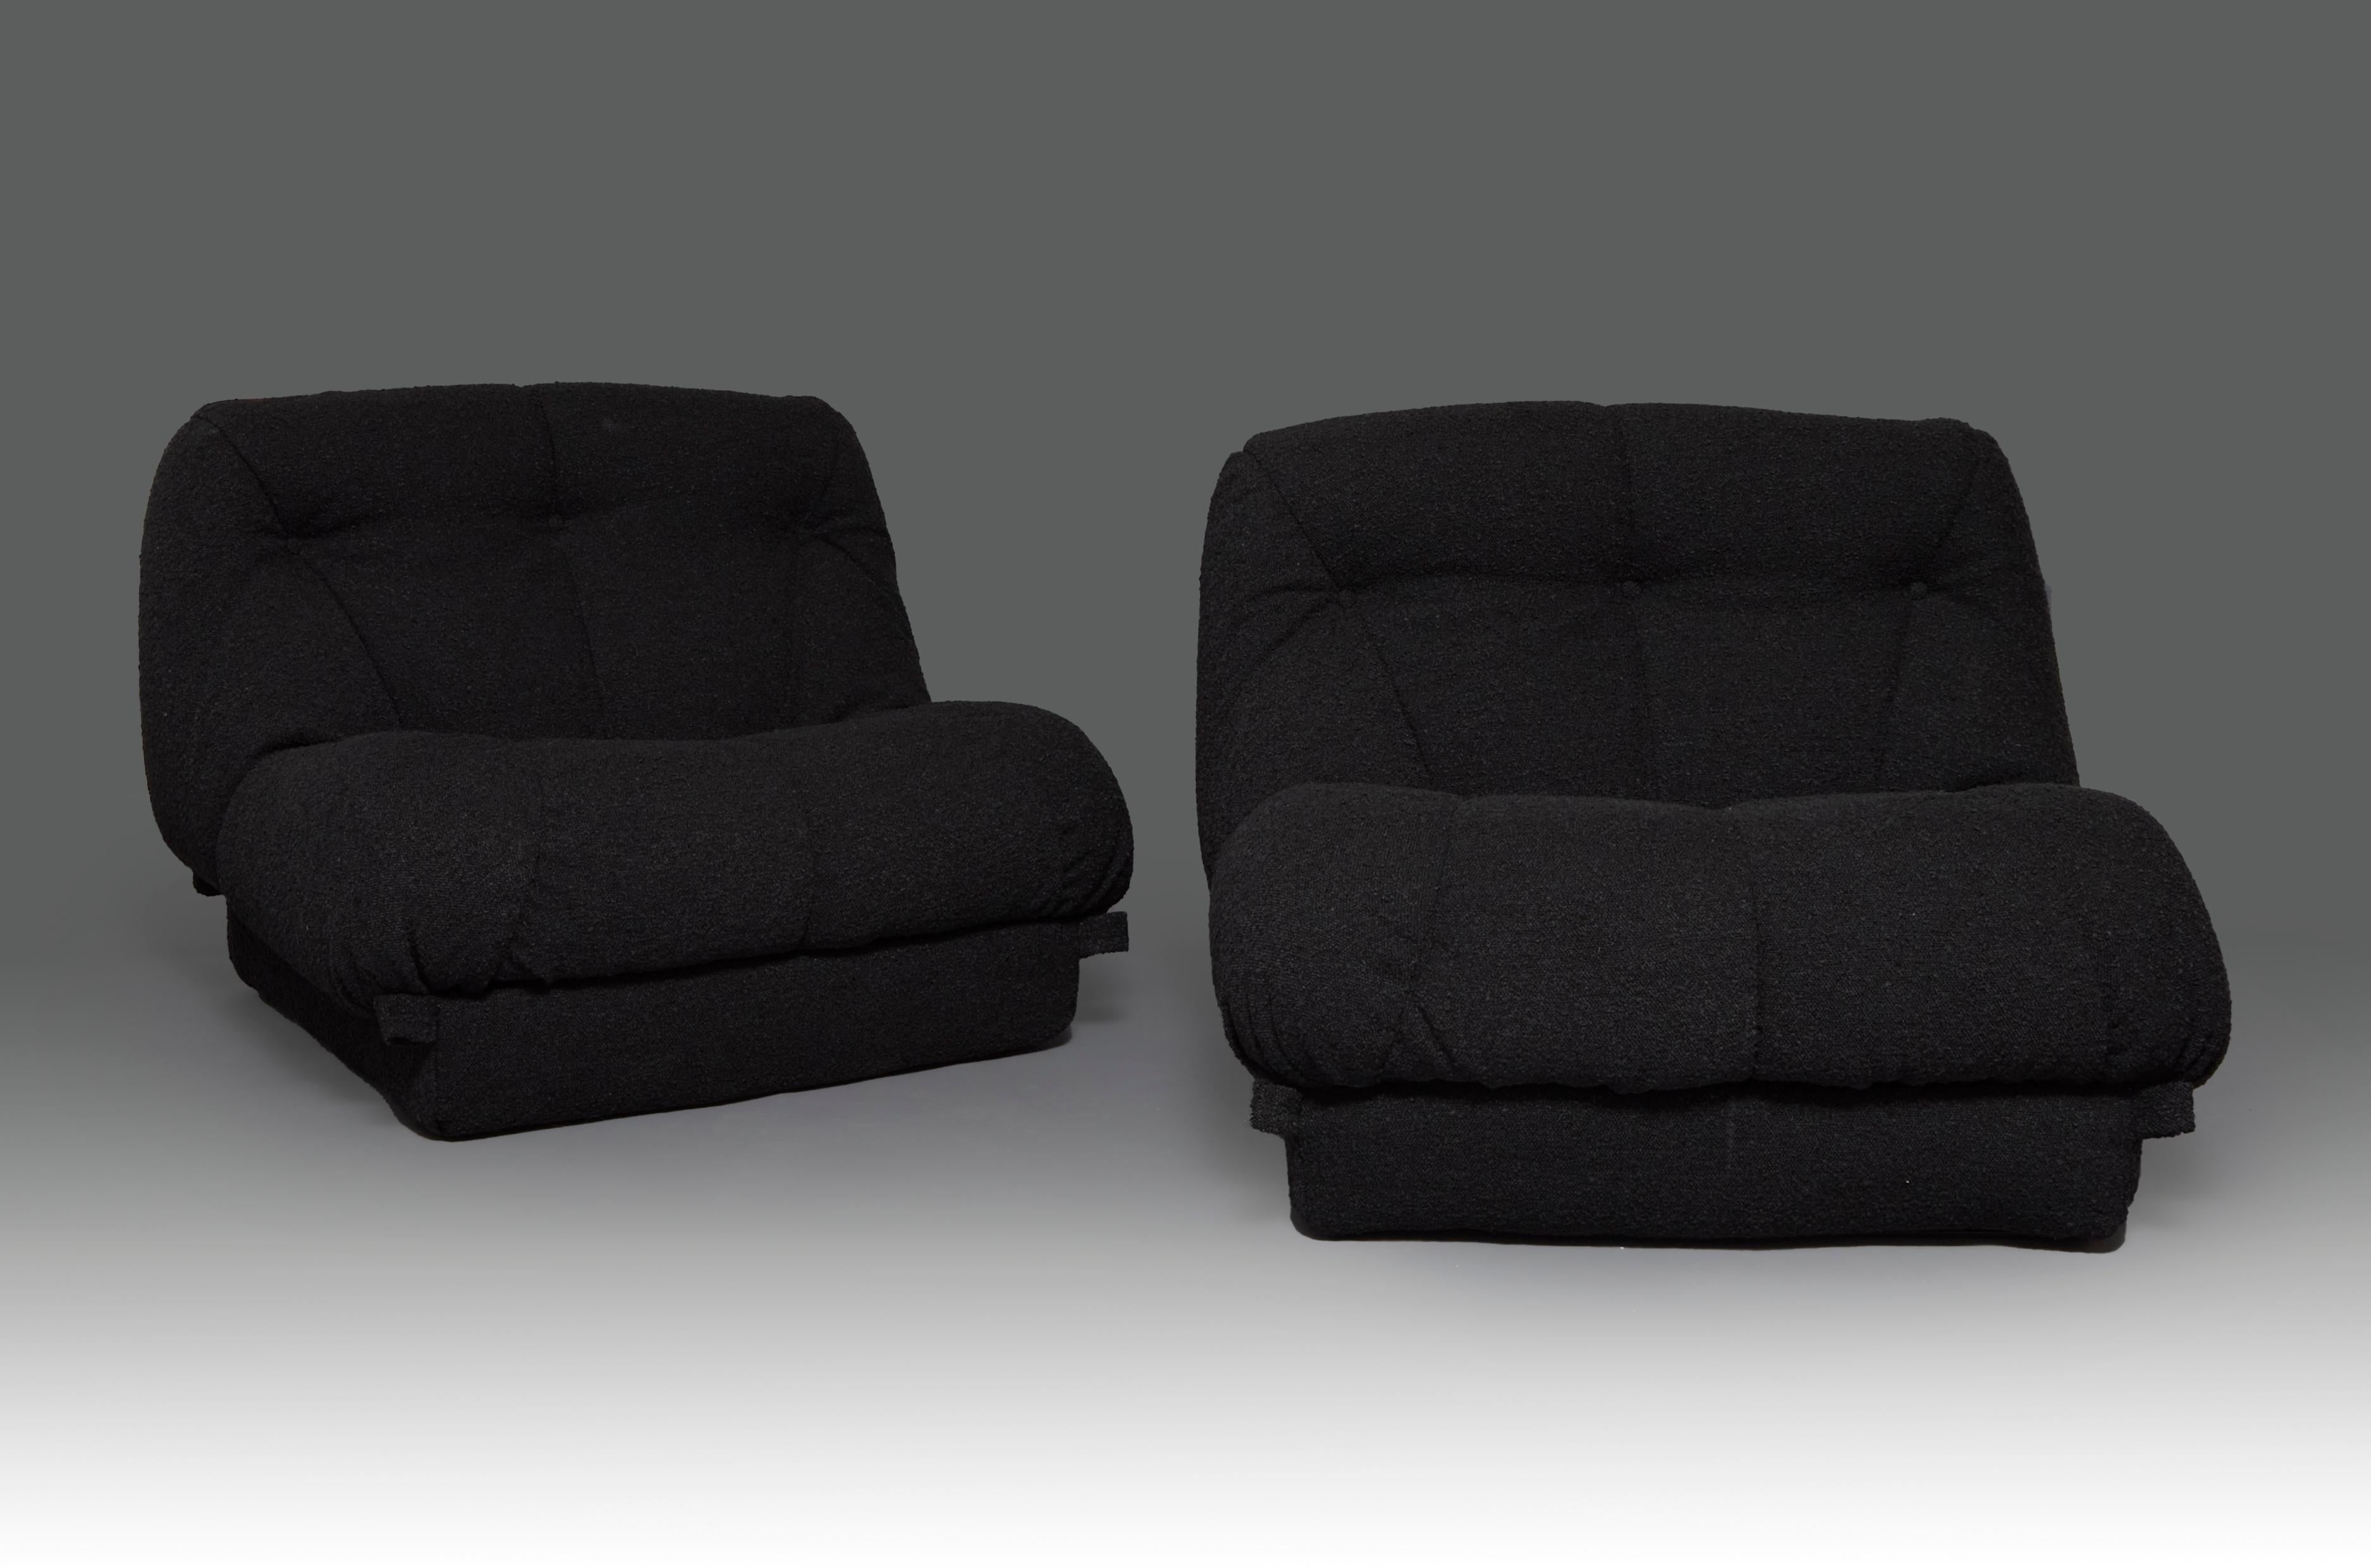 Pair of ‘’Nuvolone’’ Lounge chairs in black bouclé upholstery designed by Rino Maturi for Mimo Leone & Co. Italy, 1970’s. Fully renewed upholstery, plastic base shows little damages from age (pictures under request)

This versatile set can be